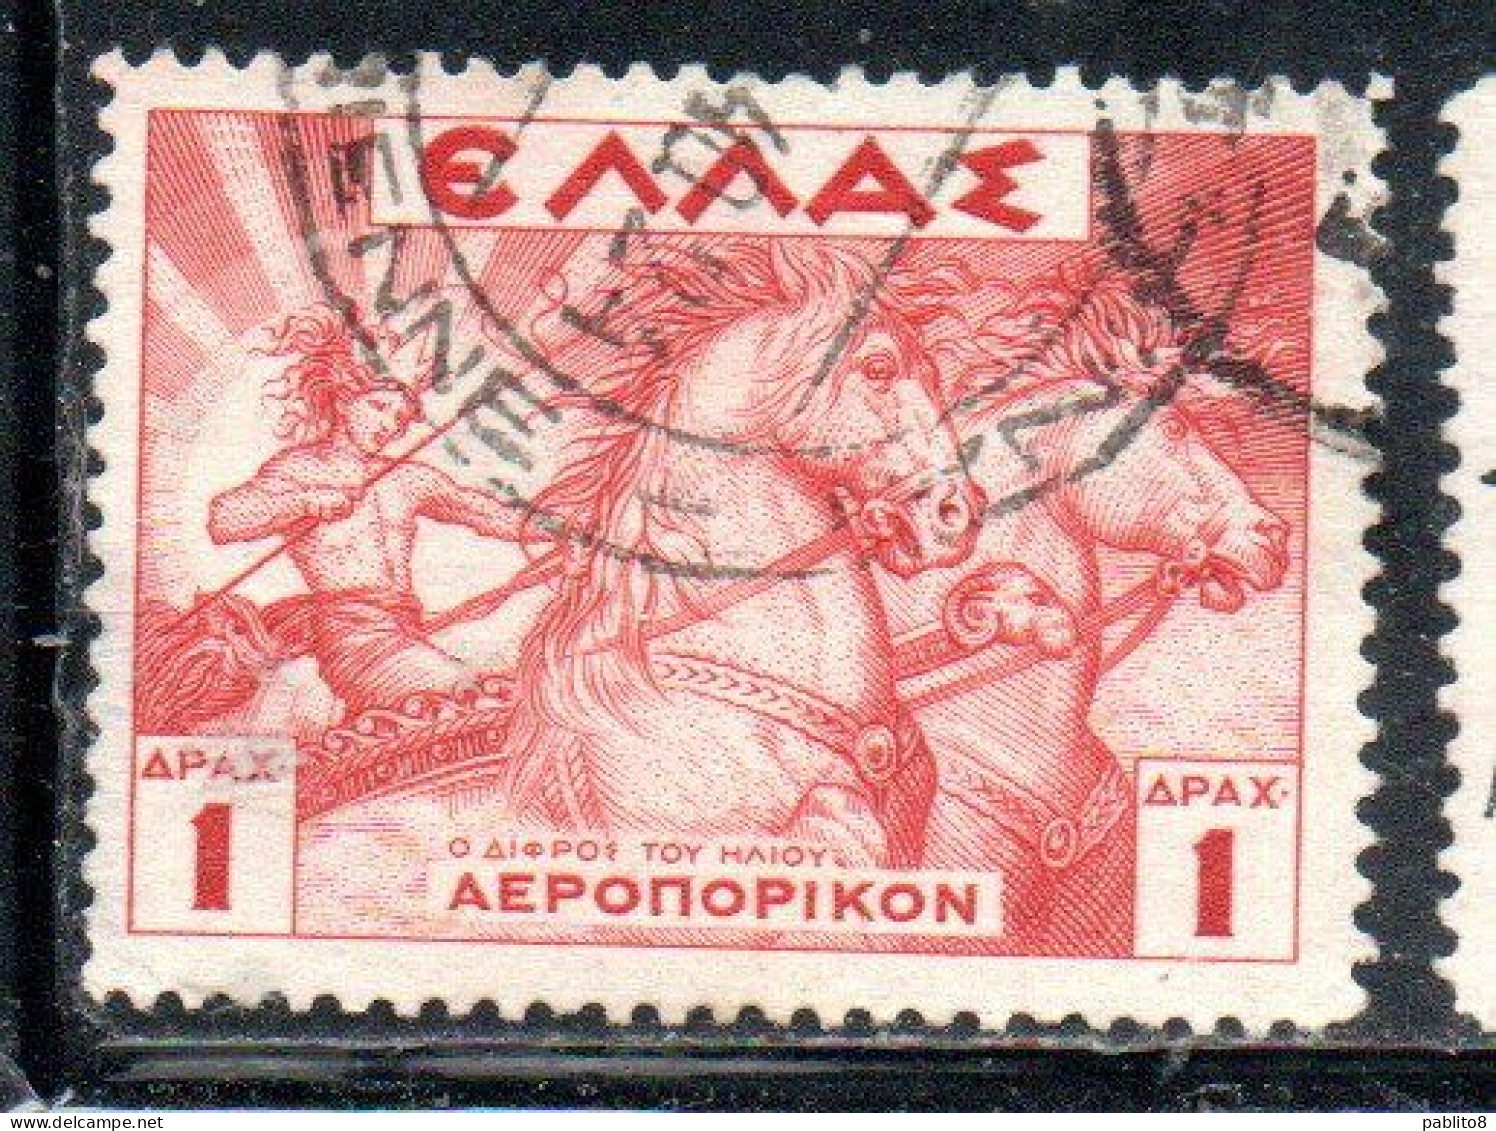 GREECE GRECIA ELLAS 1935 AIR POST MAIL AIRMAIL MYTHOLOGICAL HELIOS DRIVING THE SUN CHARIOT 1d USED USATO OBLITERE' - Usados